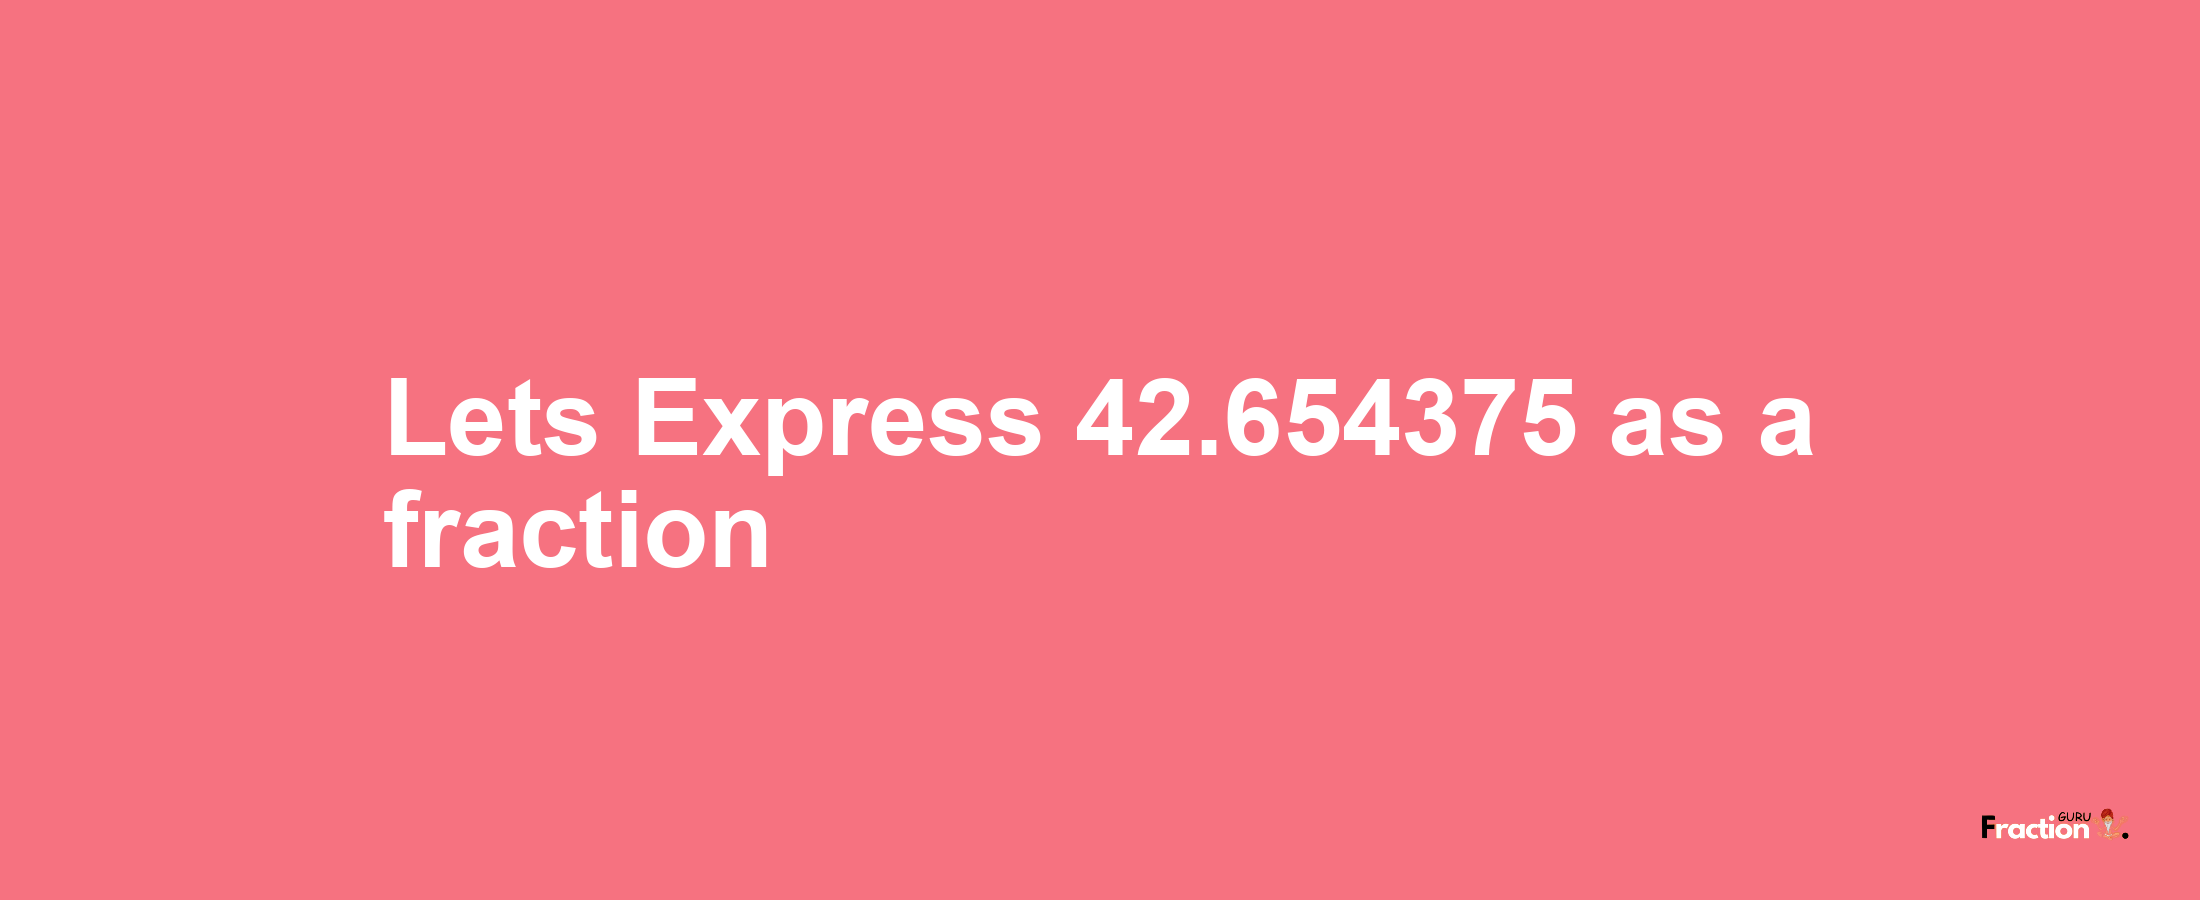 Lets Express 42.654375 as afraction